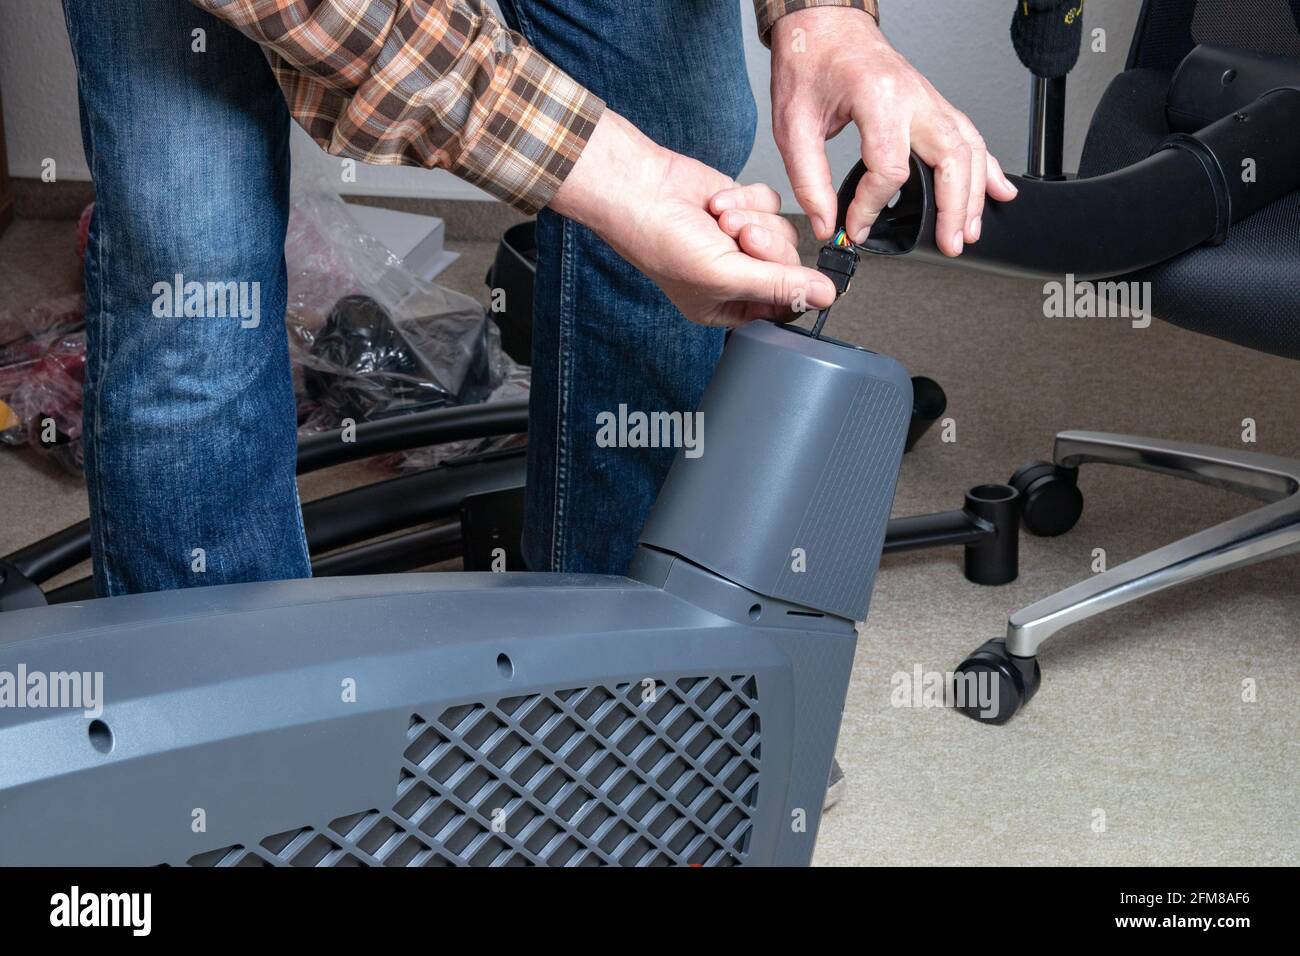 When assembling a crosstrainer, the service technician connects the computer to the electronics of the main unit using an electrical plug connector. F Stock Photo